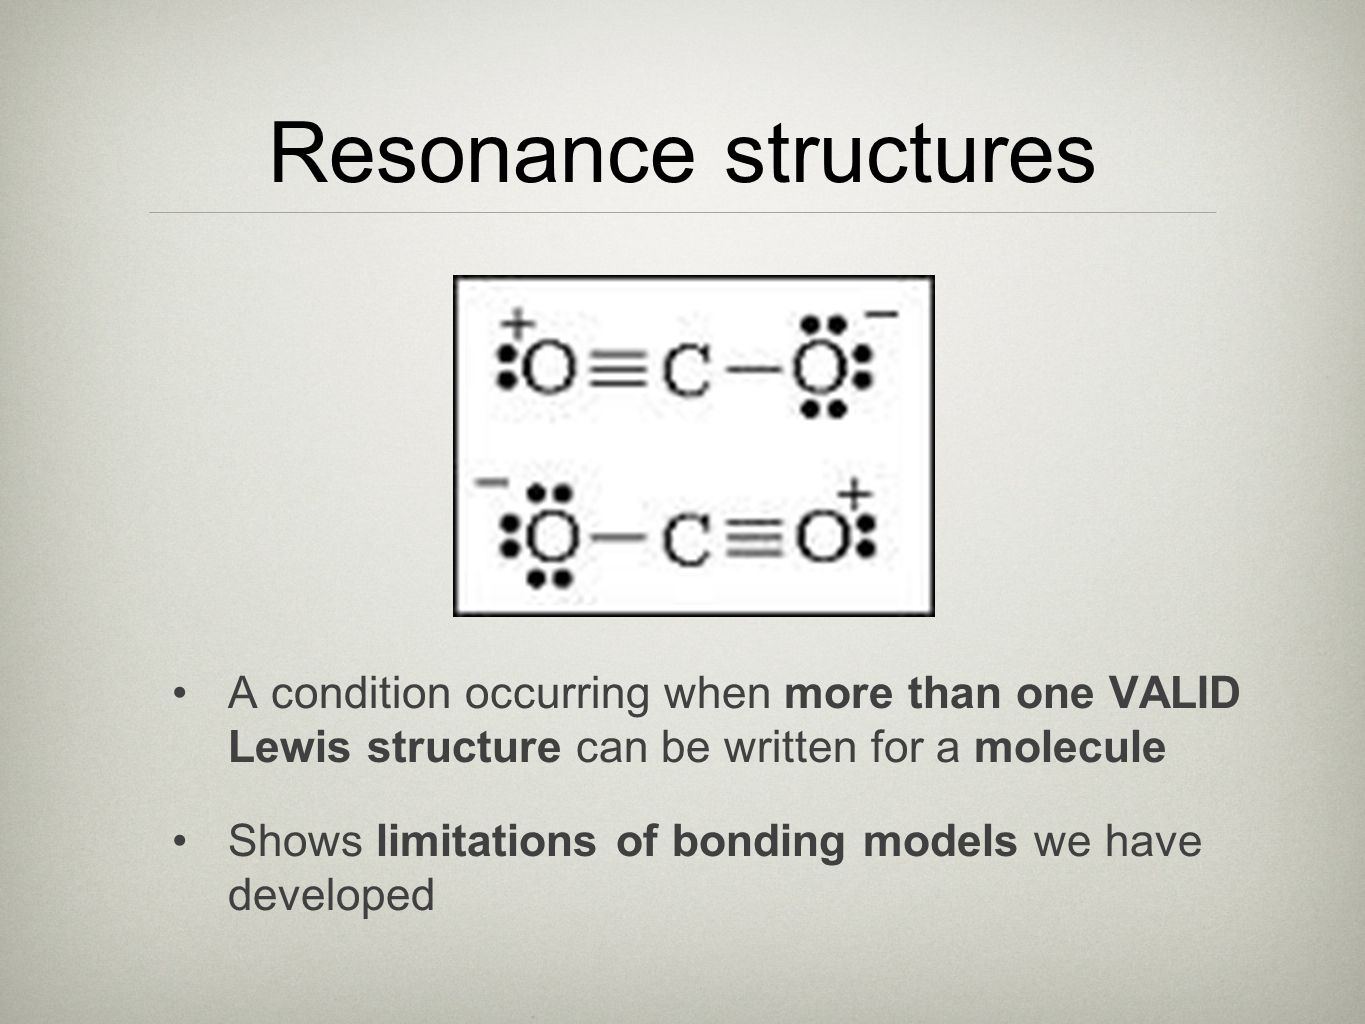 Resonance structures A condition occurring when more than one VALID Lewis structure can be written for a molecule.